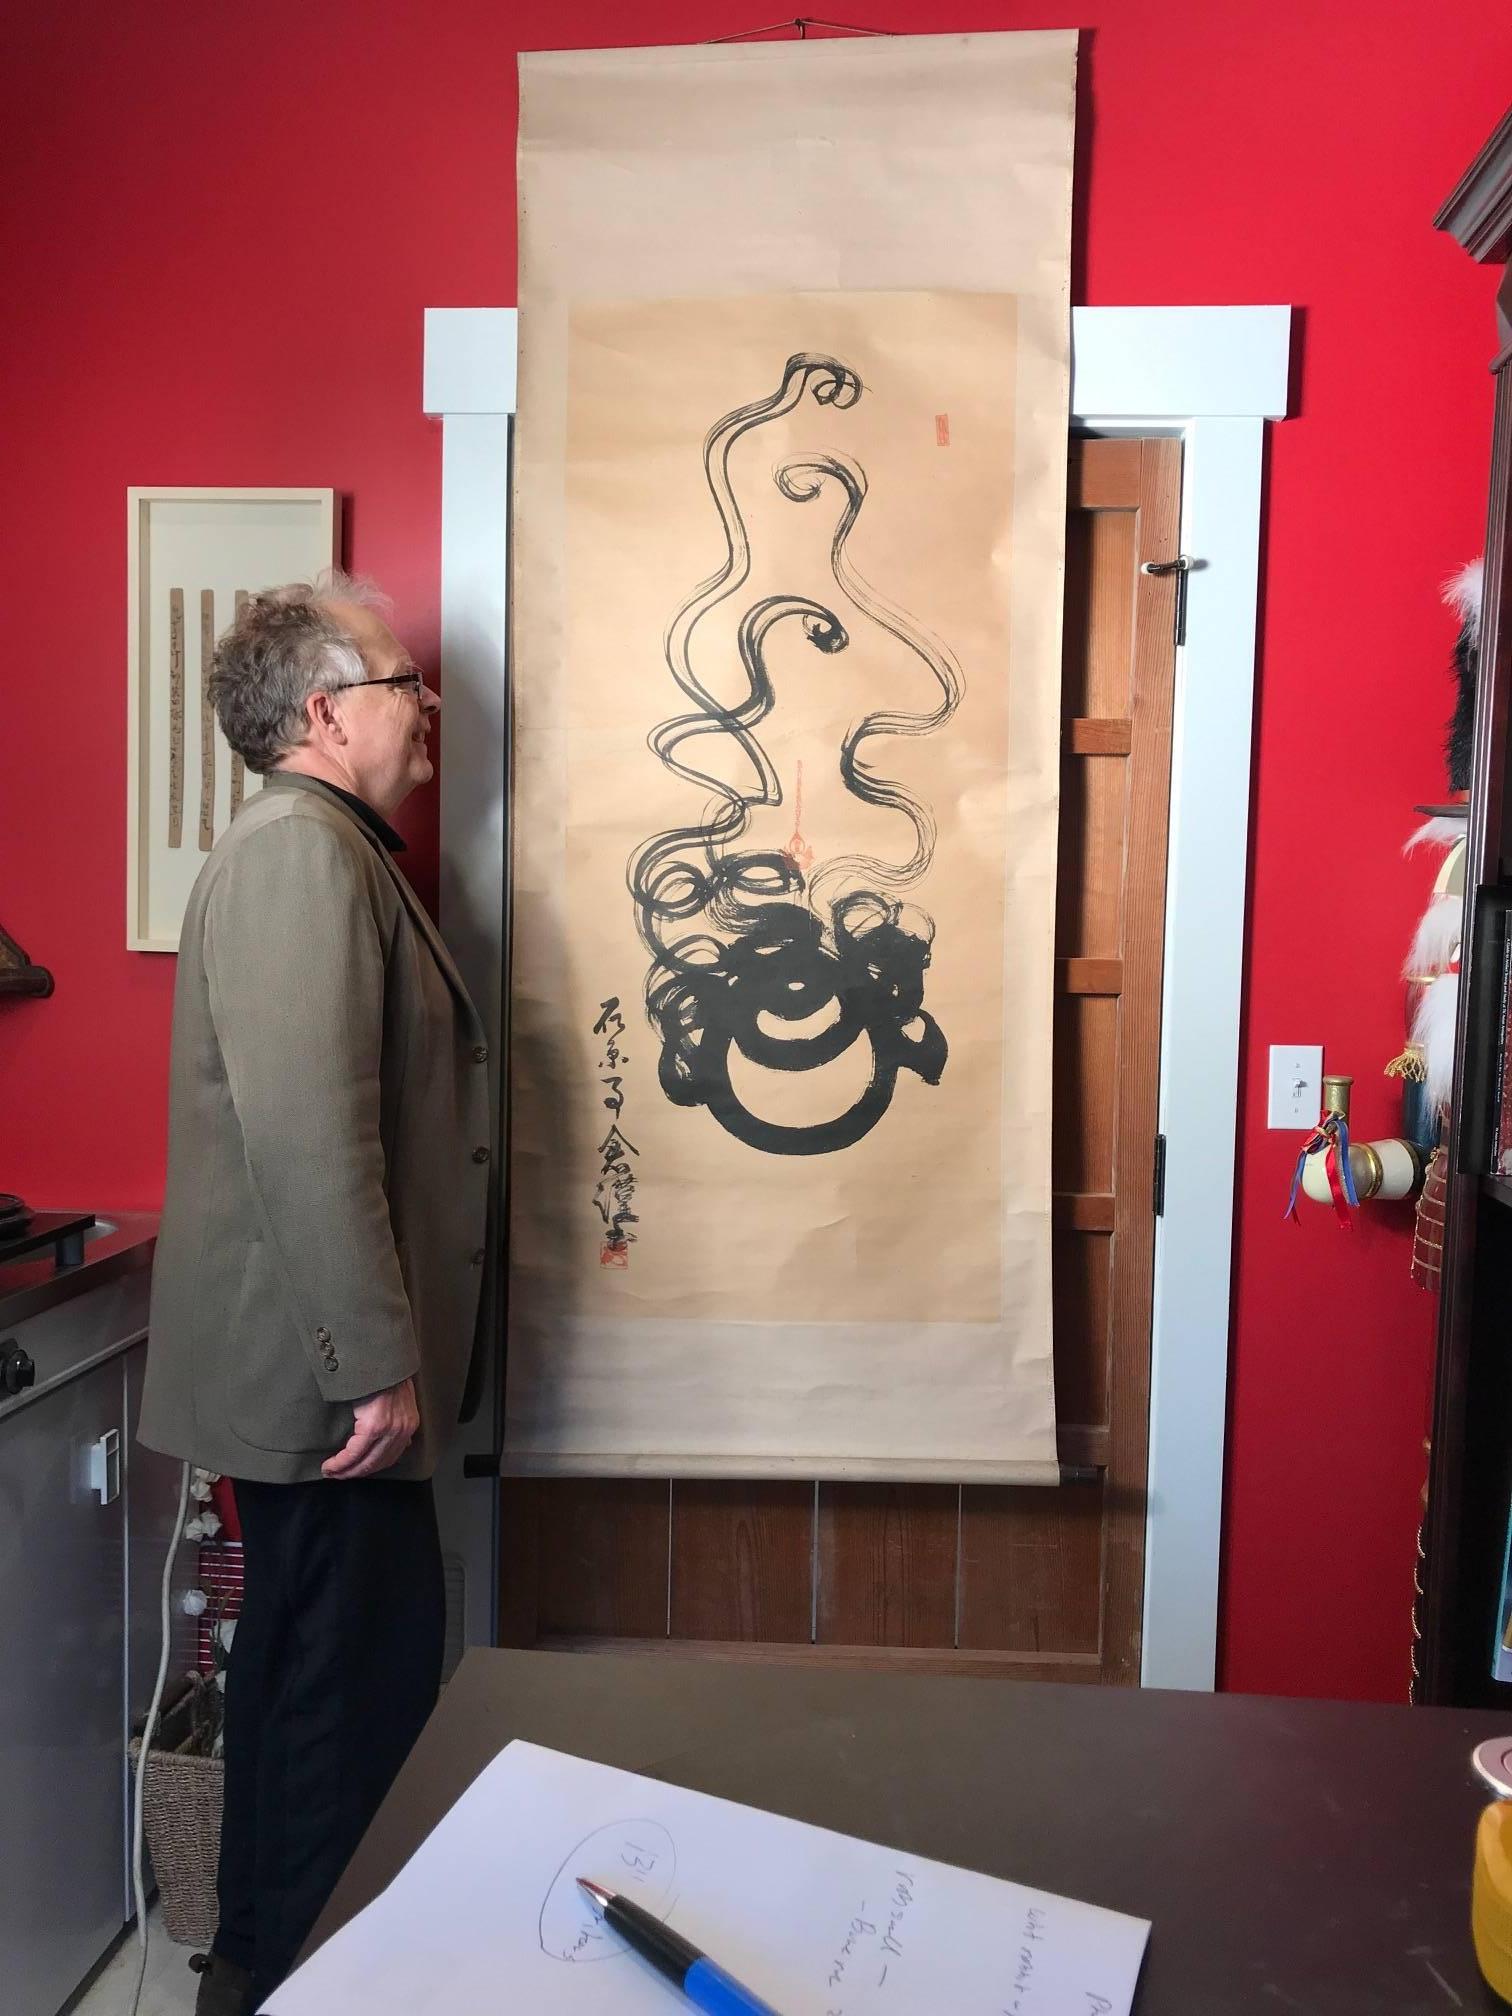 Japan, remarkable HoJu, the wish granting jewel, signed, calligraphy painted on paper, wood rollers.

Dimensions: 33 inches wide and 74 inches length.

Zen like but piqued subject matter, this painting is skilfully and tastefully rendered in